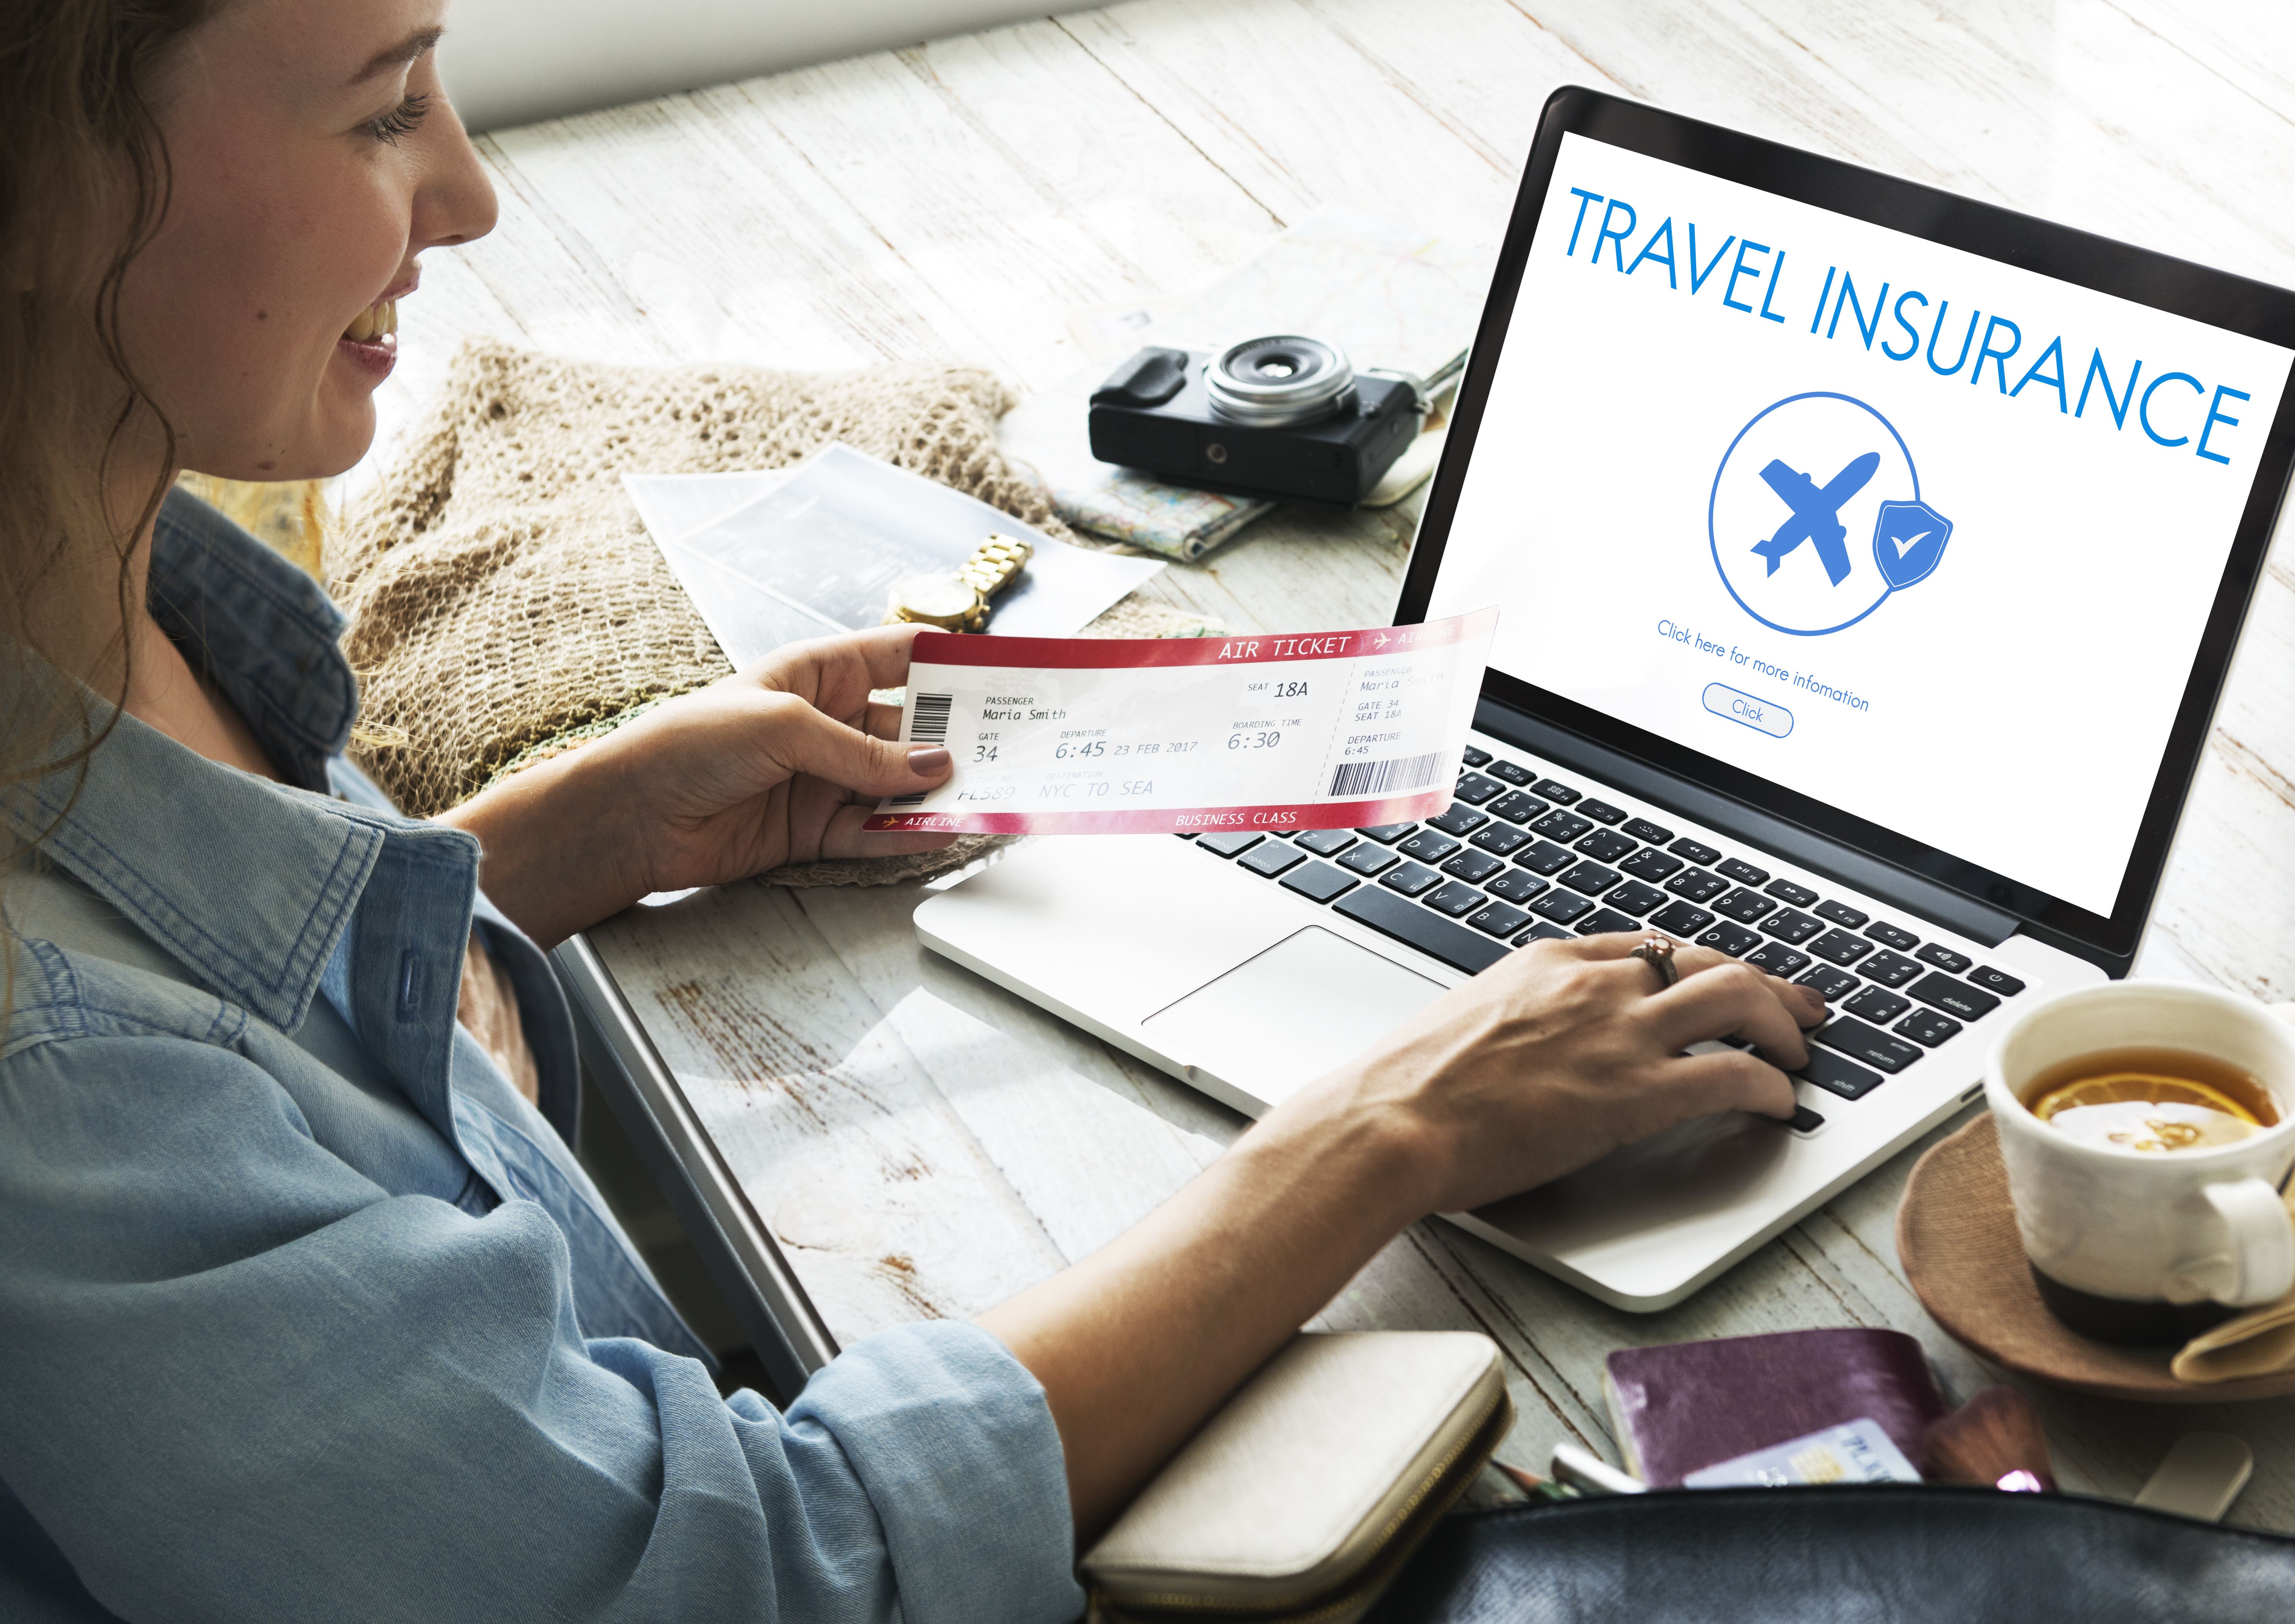 A woman buying travel insurance